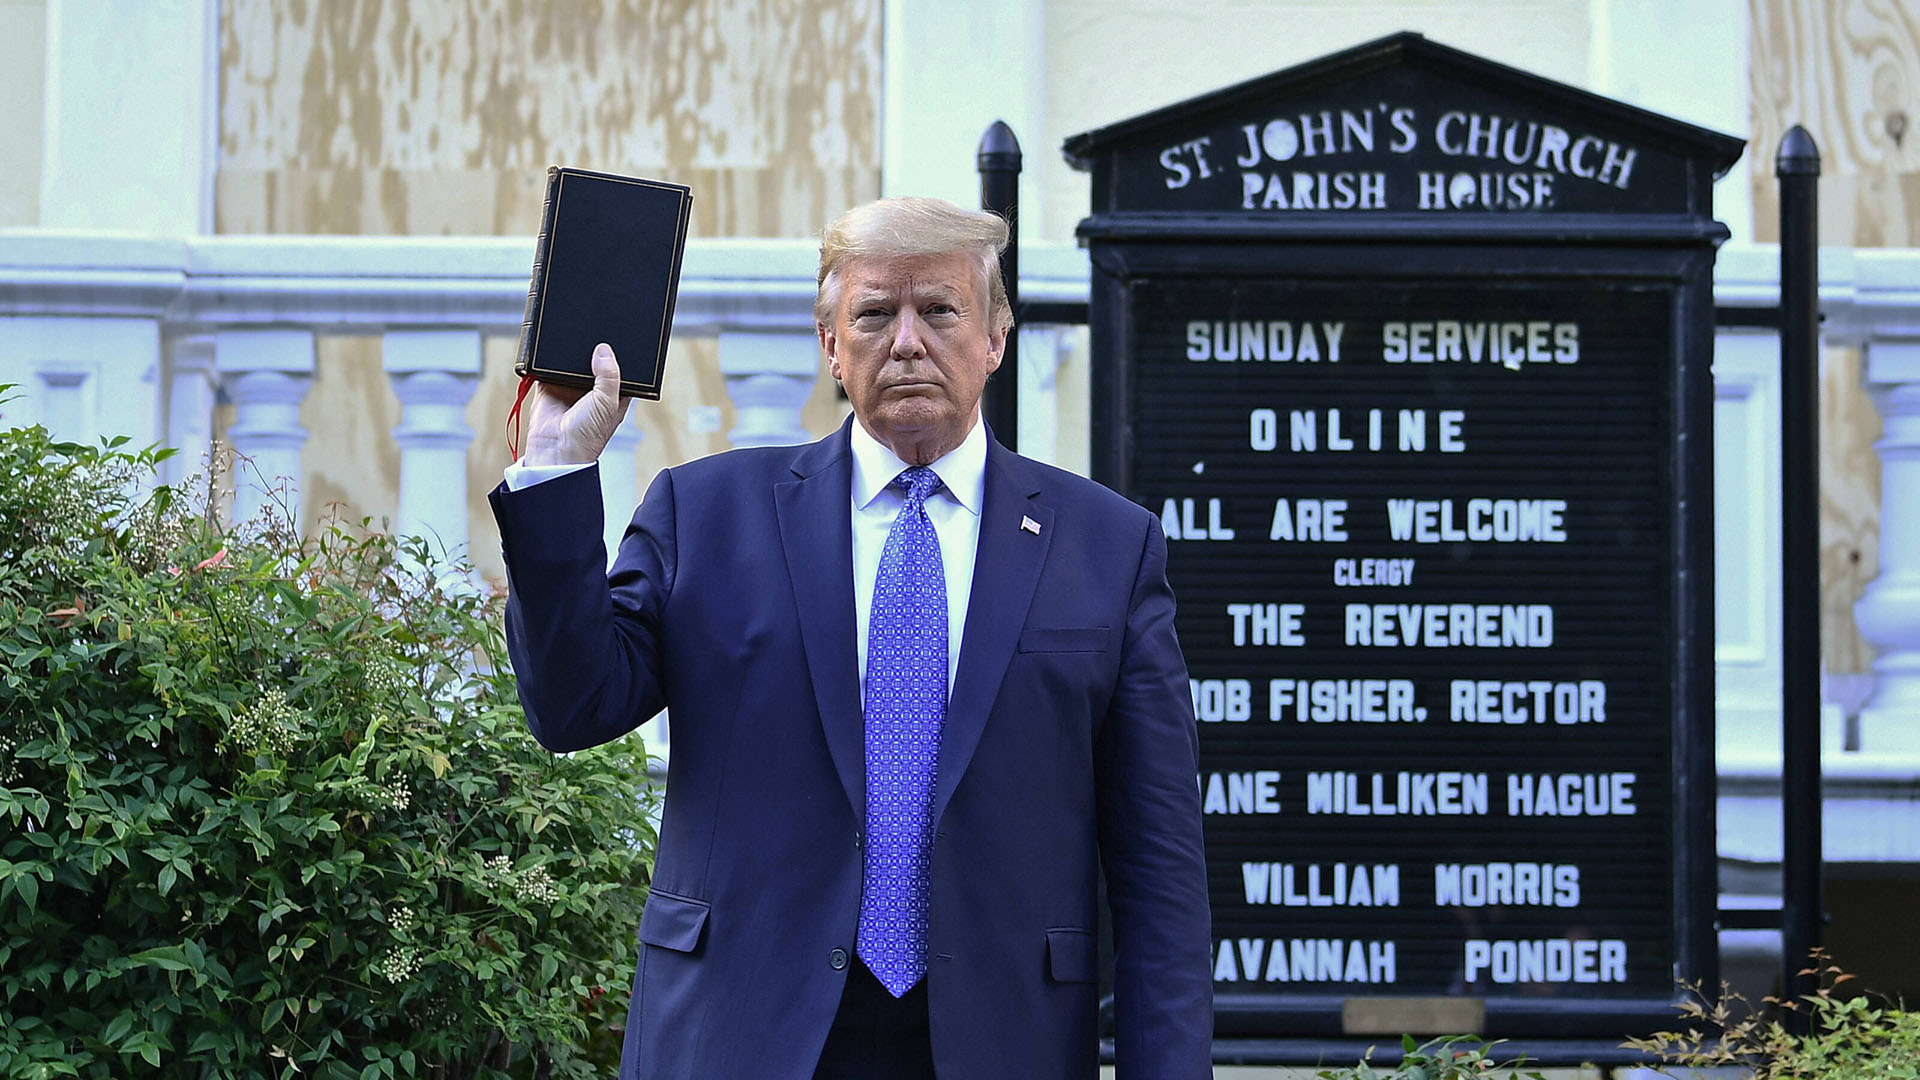 Trump-Holding-Bible-After-Tear-Gassing-Peaceful-Protestors-for-an-Obscene-Photo-Op-Large